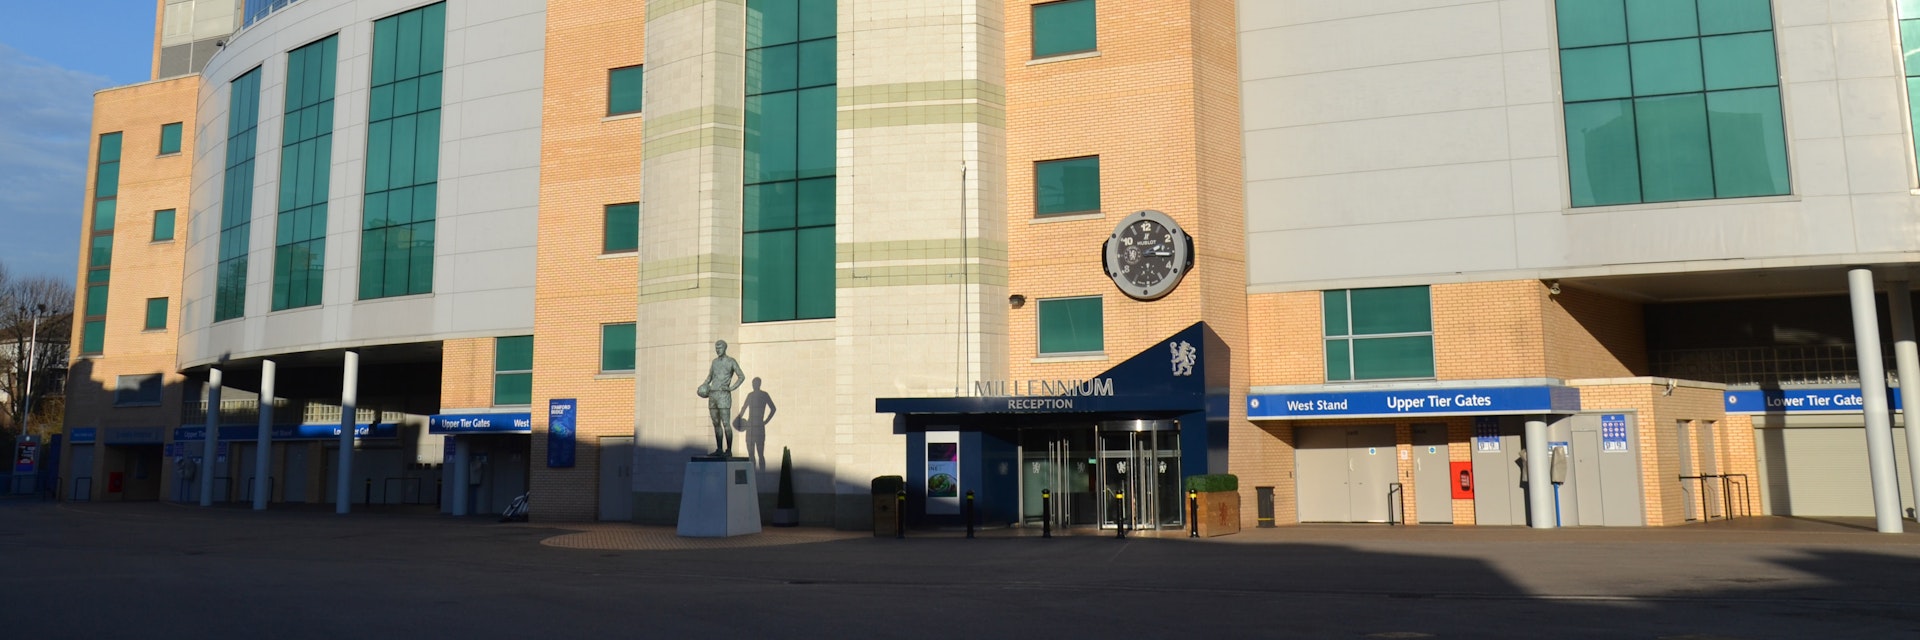 The main entrance to Stamford Bridge, Chelsea Football Club's home ground